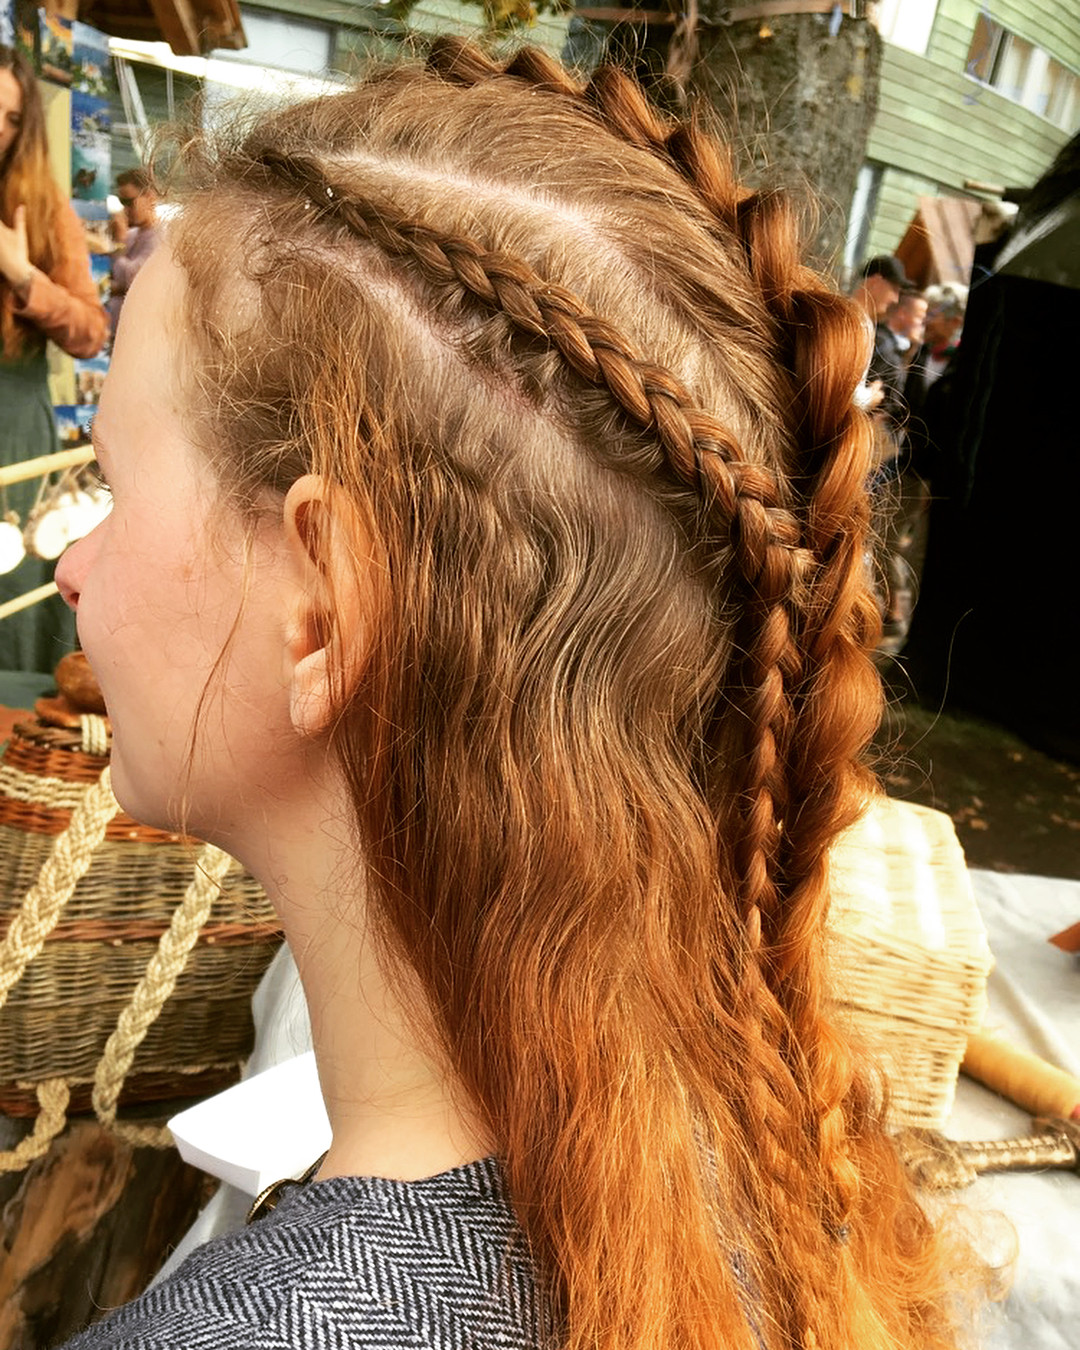 68 Medieval Hairstyles You Need To Try Right Now